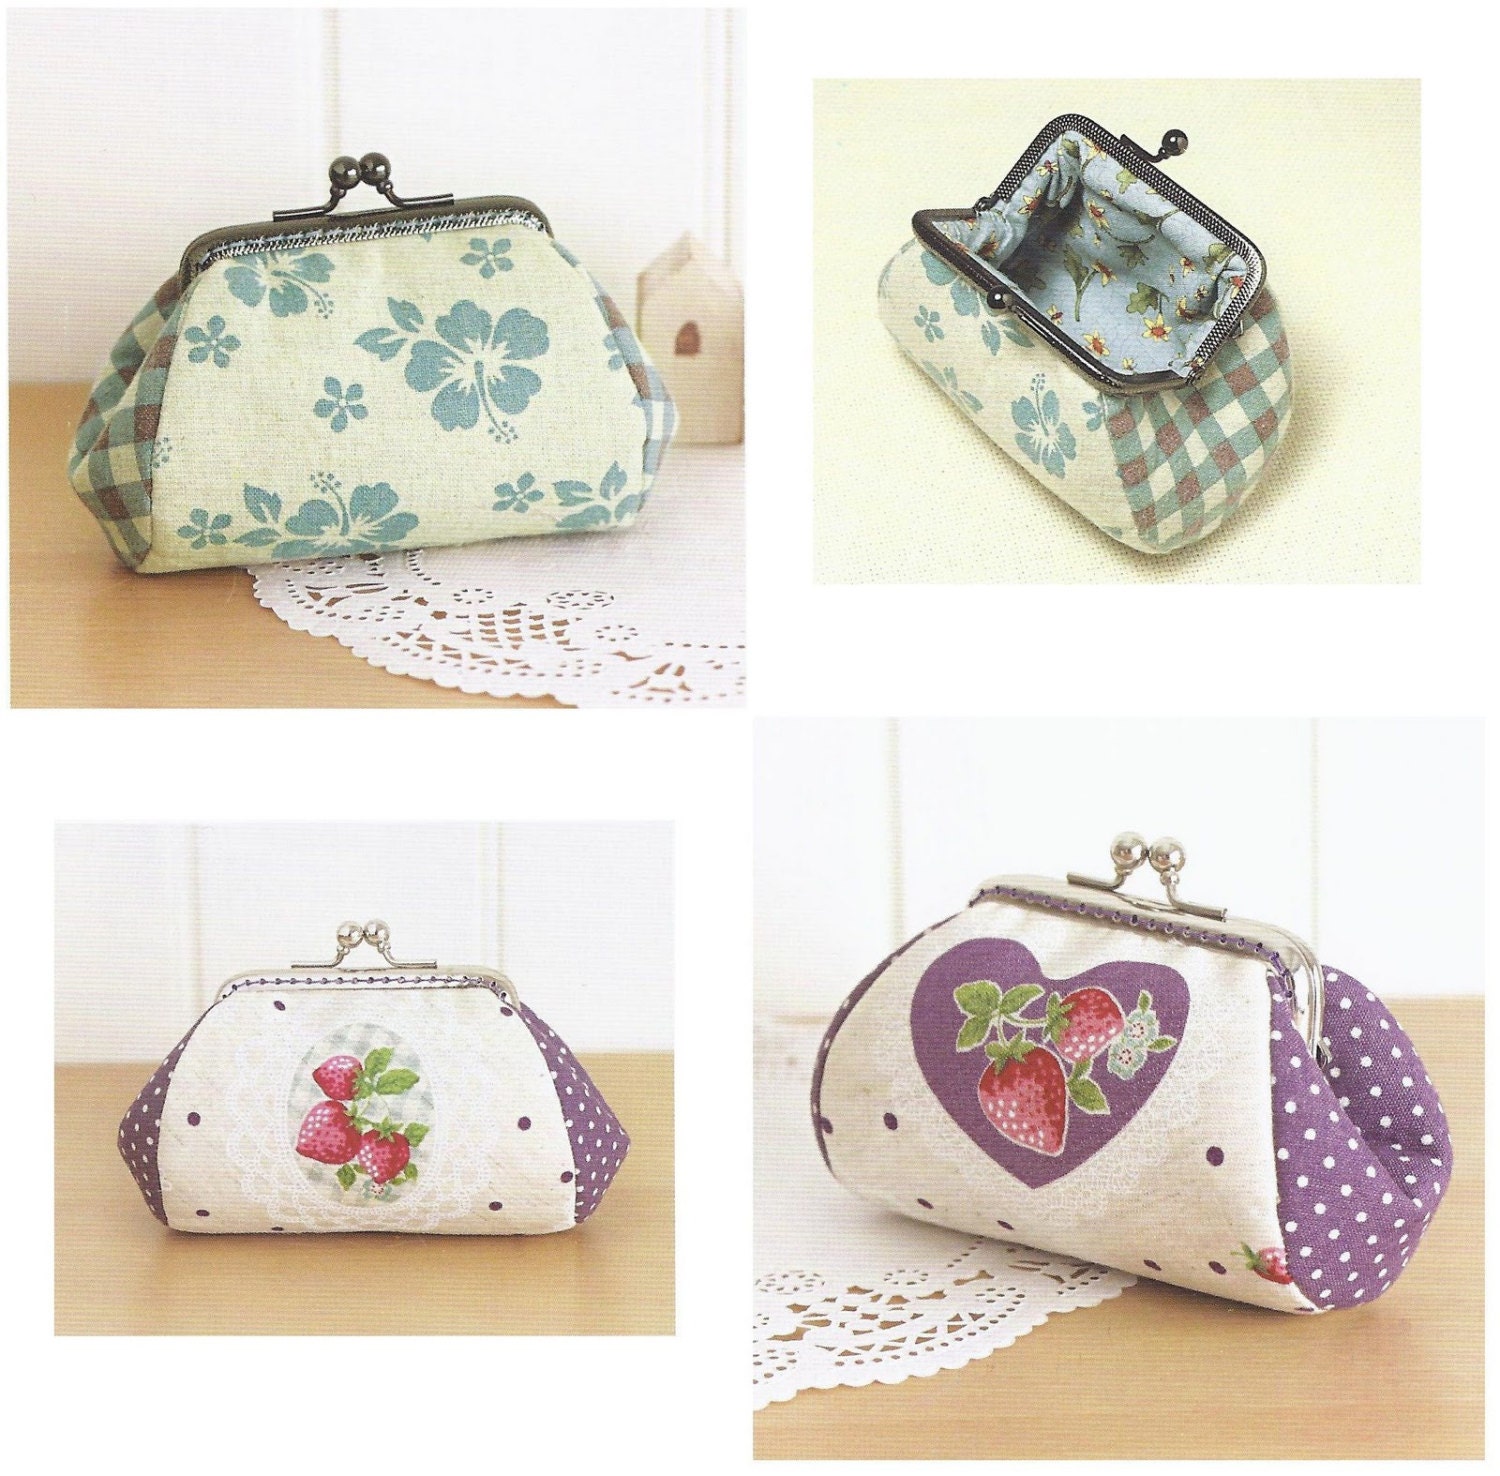 Small pouch frame purse sewing pattern make up bag by Giftsandbobs